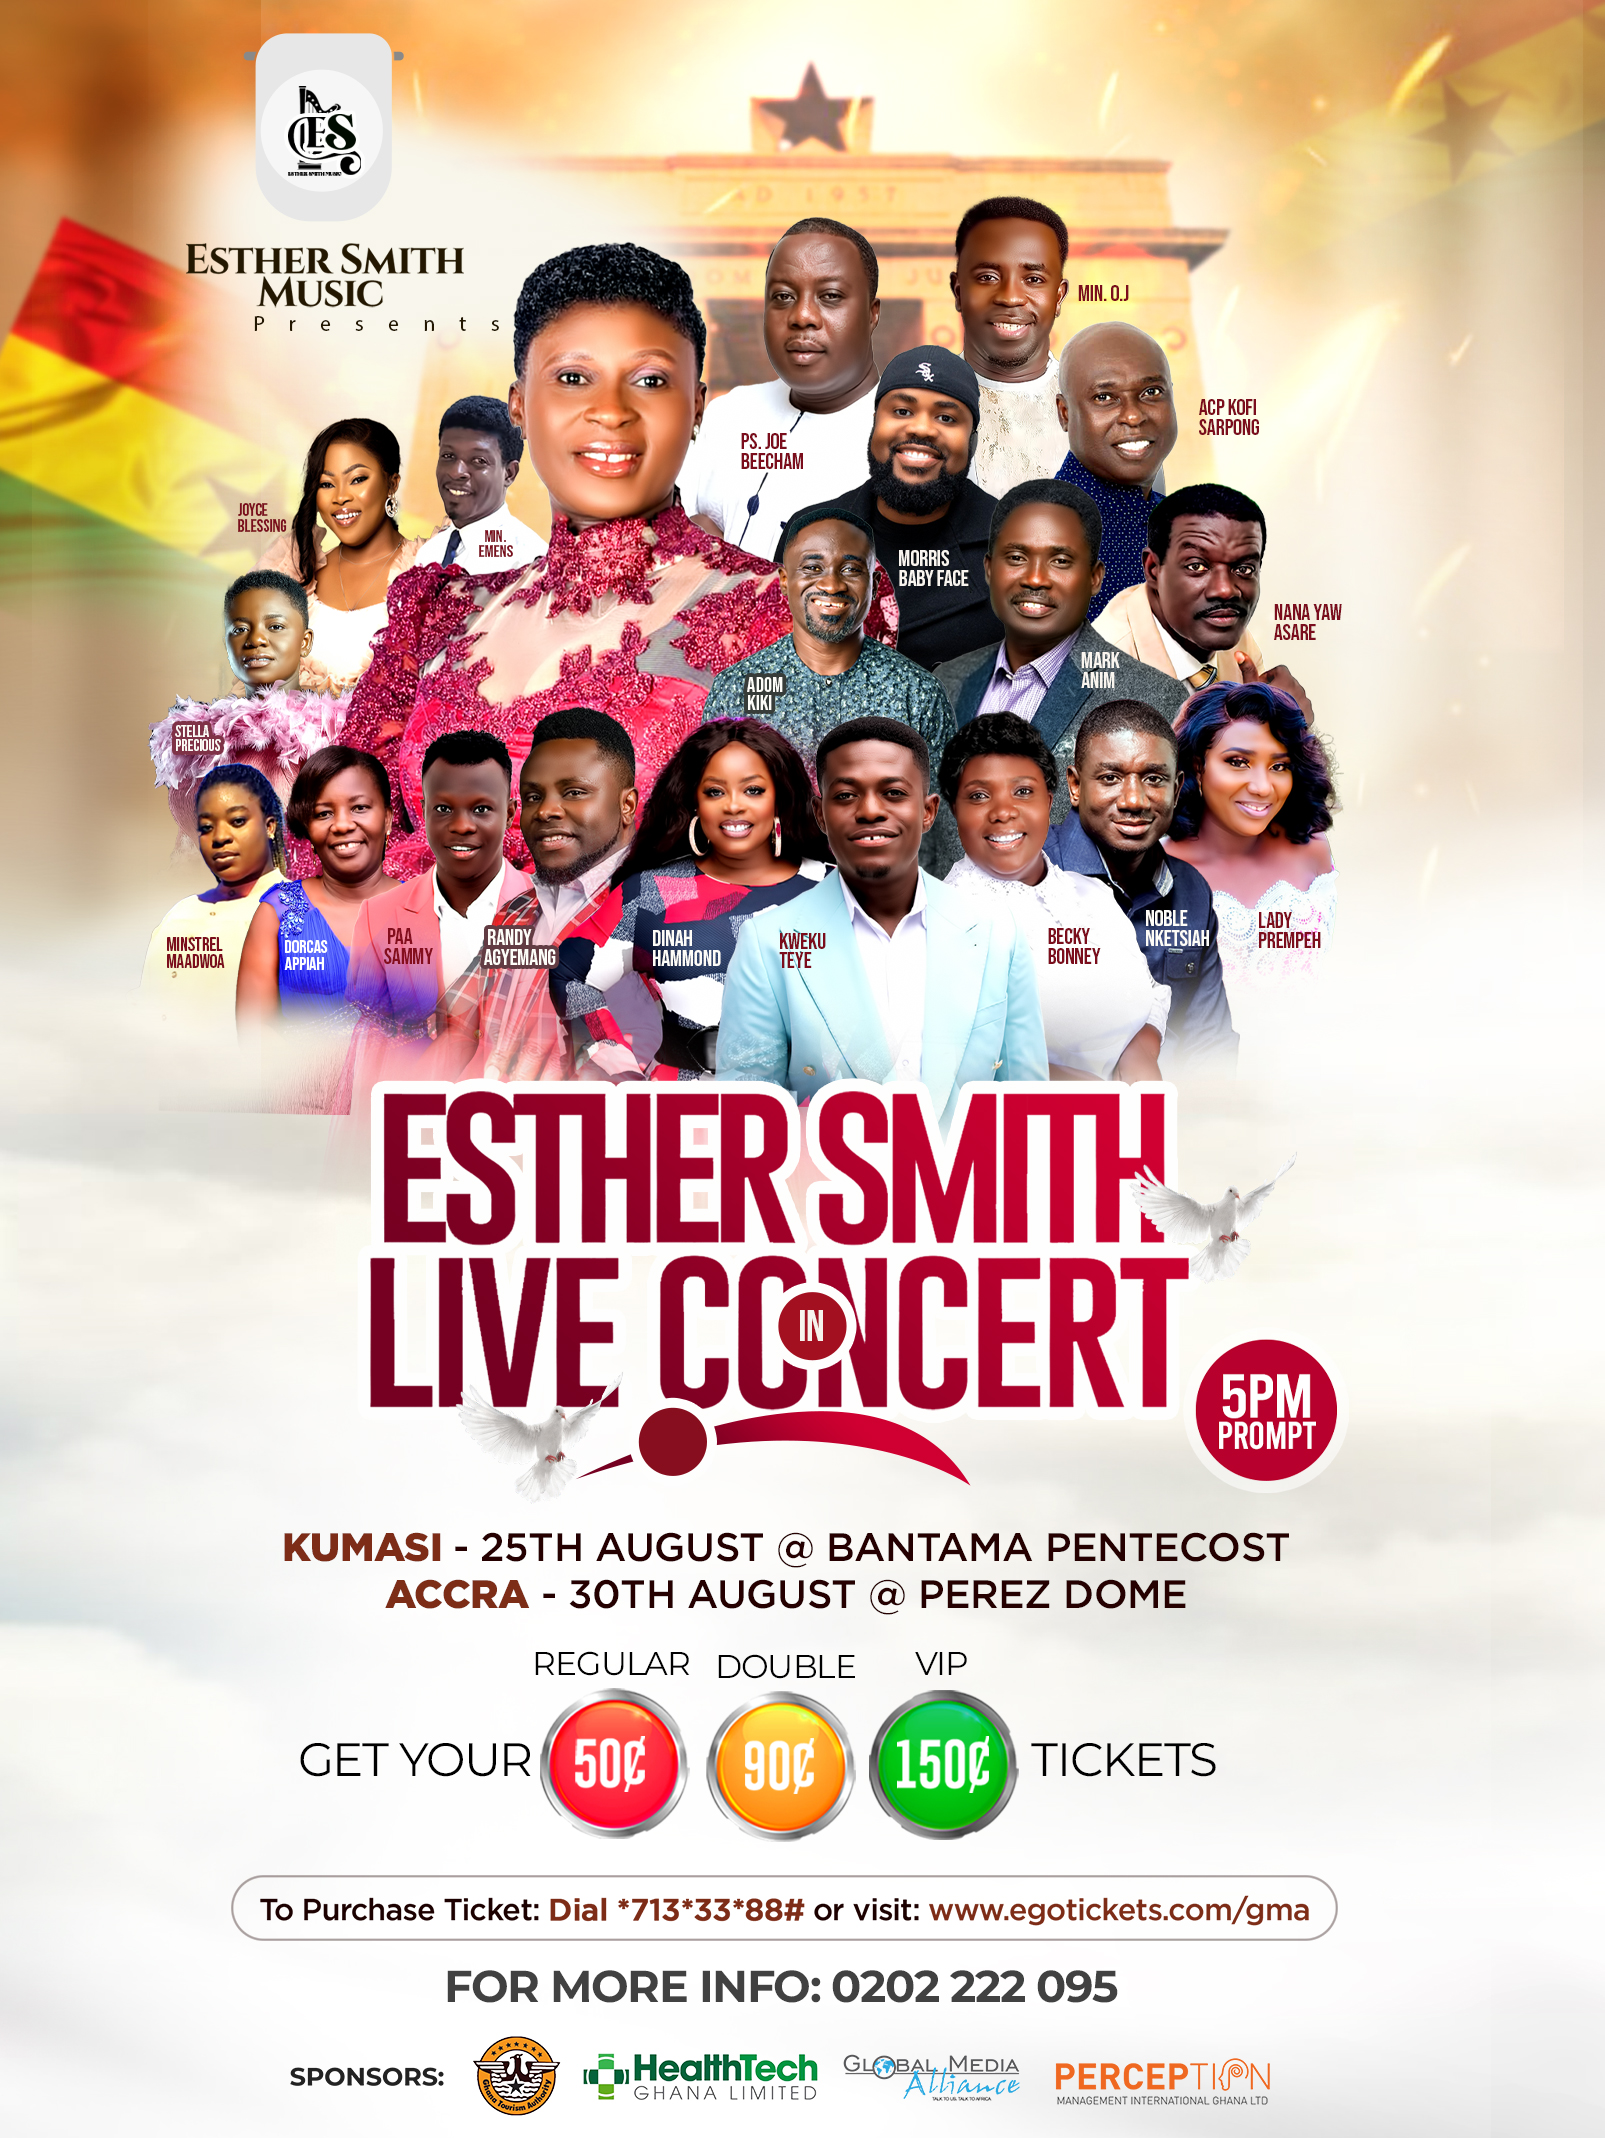 Top stars for Esther Smith Concert as ticket sales go live